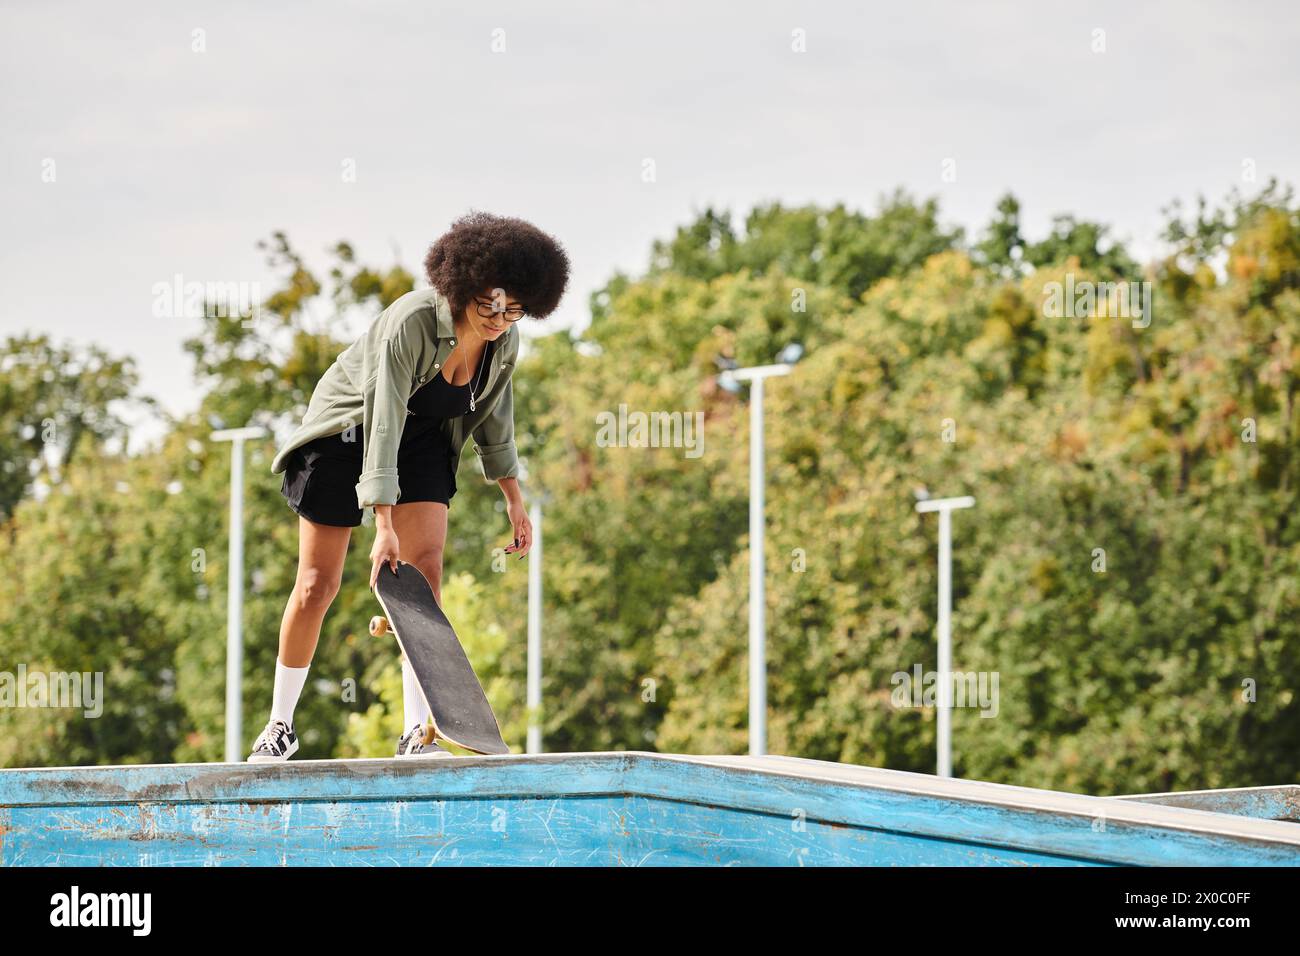 A talented young African American woman with curly hair skateboards by the edge of a pool in a dynamic and daring move. Stock Photo